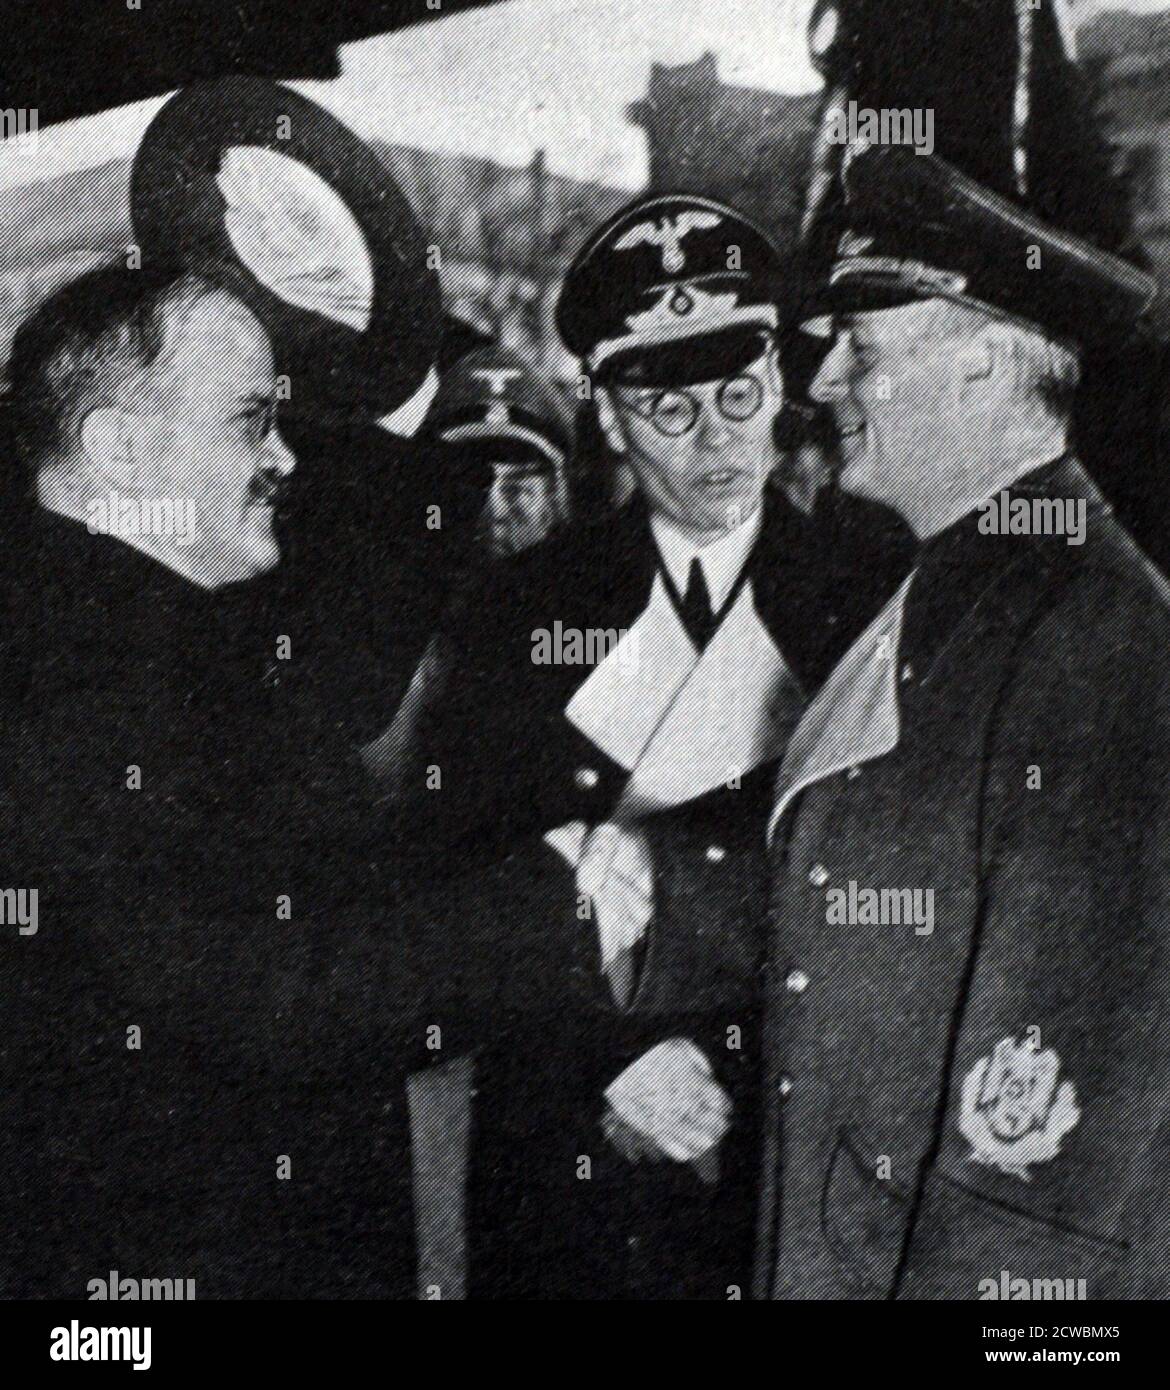 Black and white photograph of World War II (1939-1945); Vyacheslav Molotov (1890-1986) visits Berlin in November 1940, shaking hands with Joachim von Ribbentrop (1893-1946), German foreign minister. Stock Photo